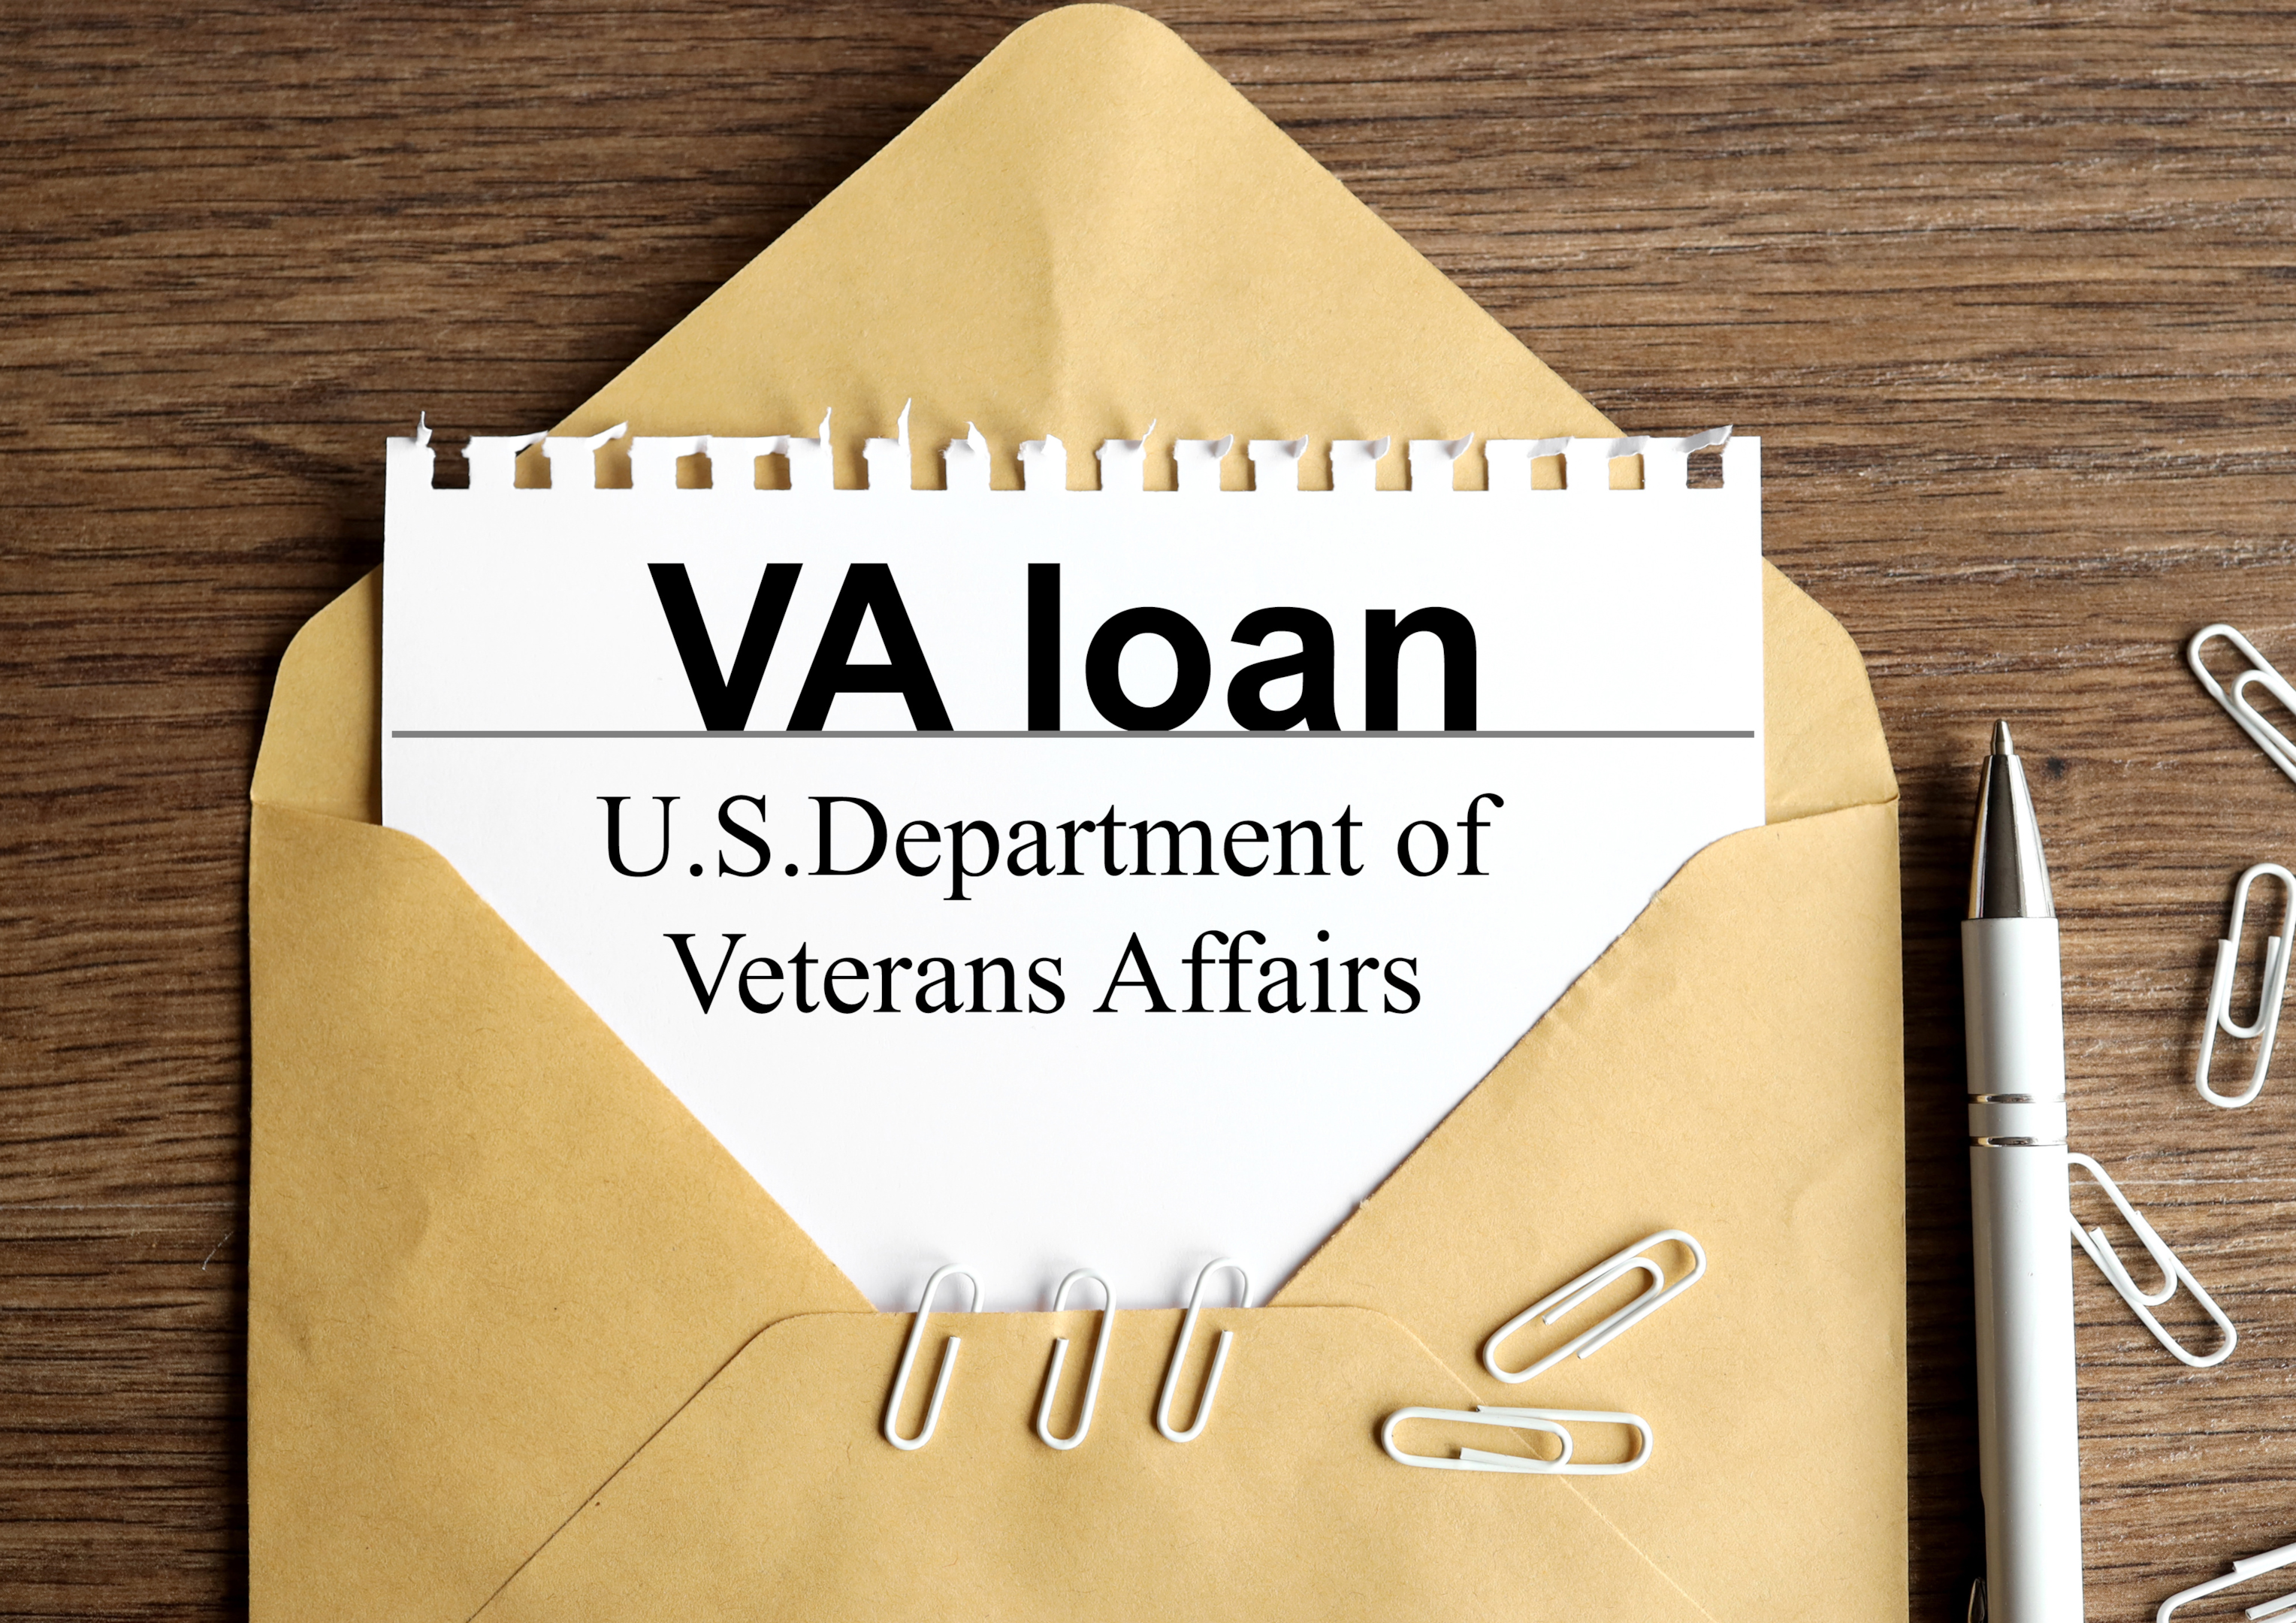 Veteran business loan from the small business administration for veteran business owners.